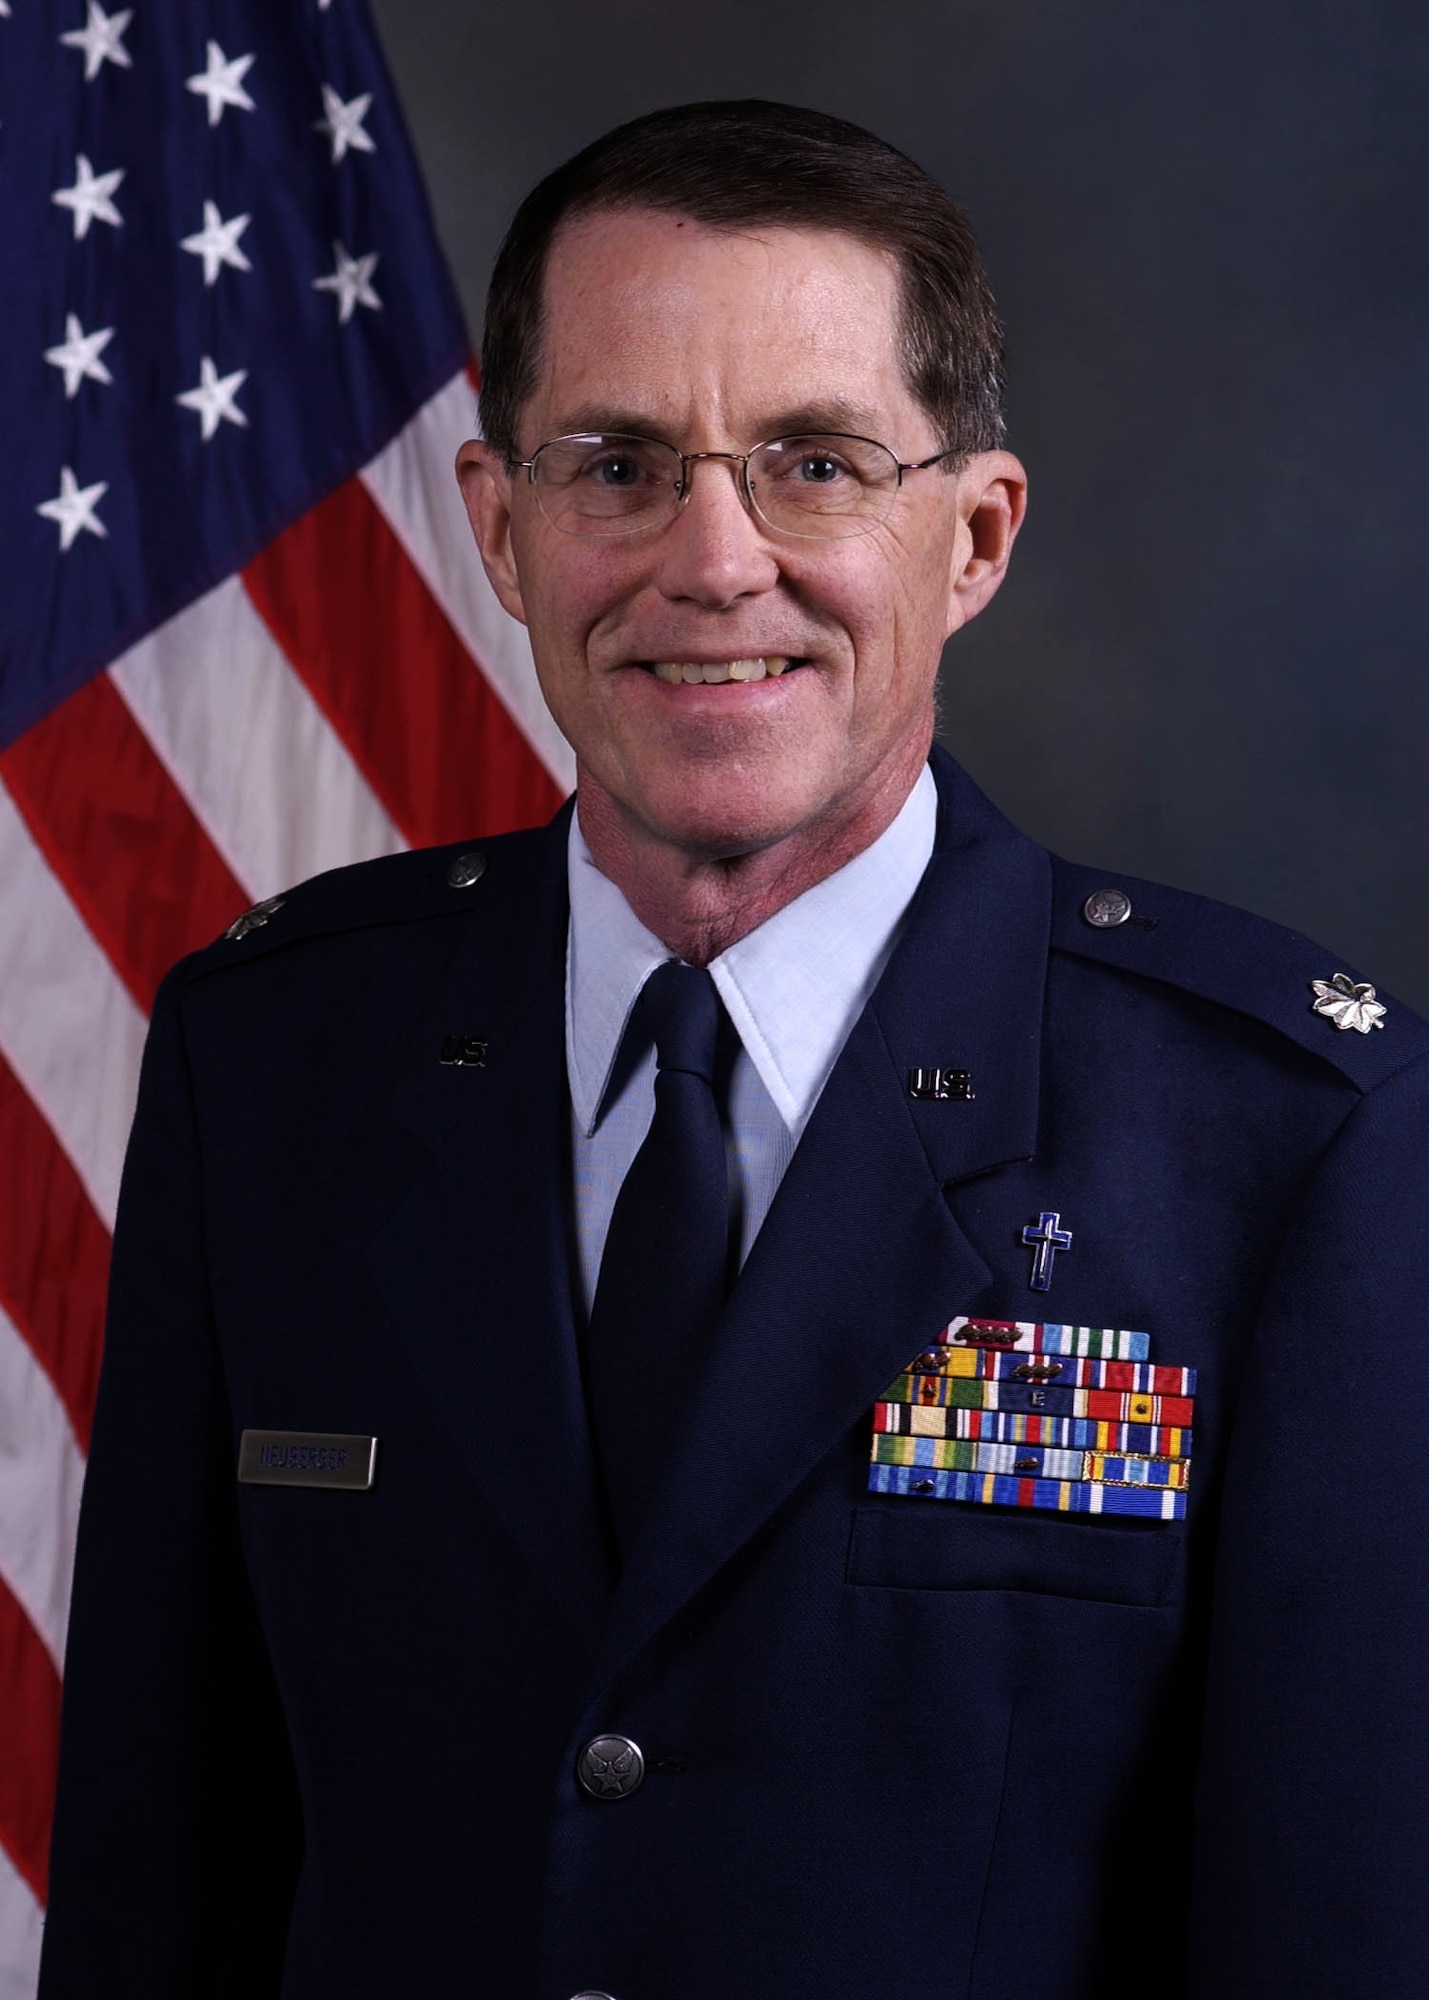 Commentary by Lt. Col. Jeffrey Neuberger, 92nd Air Refueling Wing Chaplain